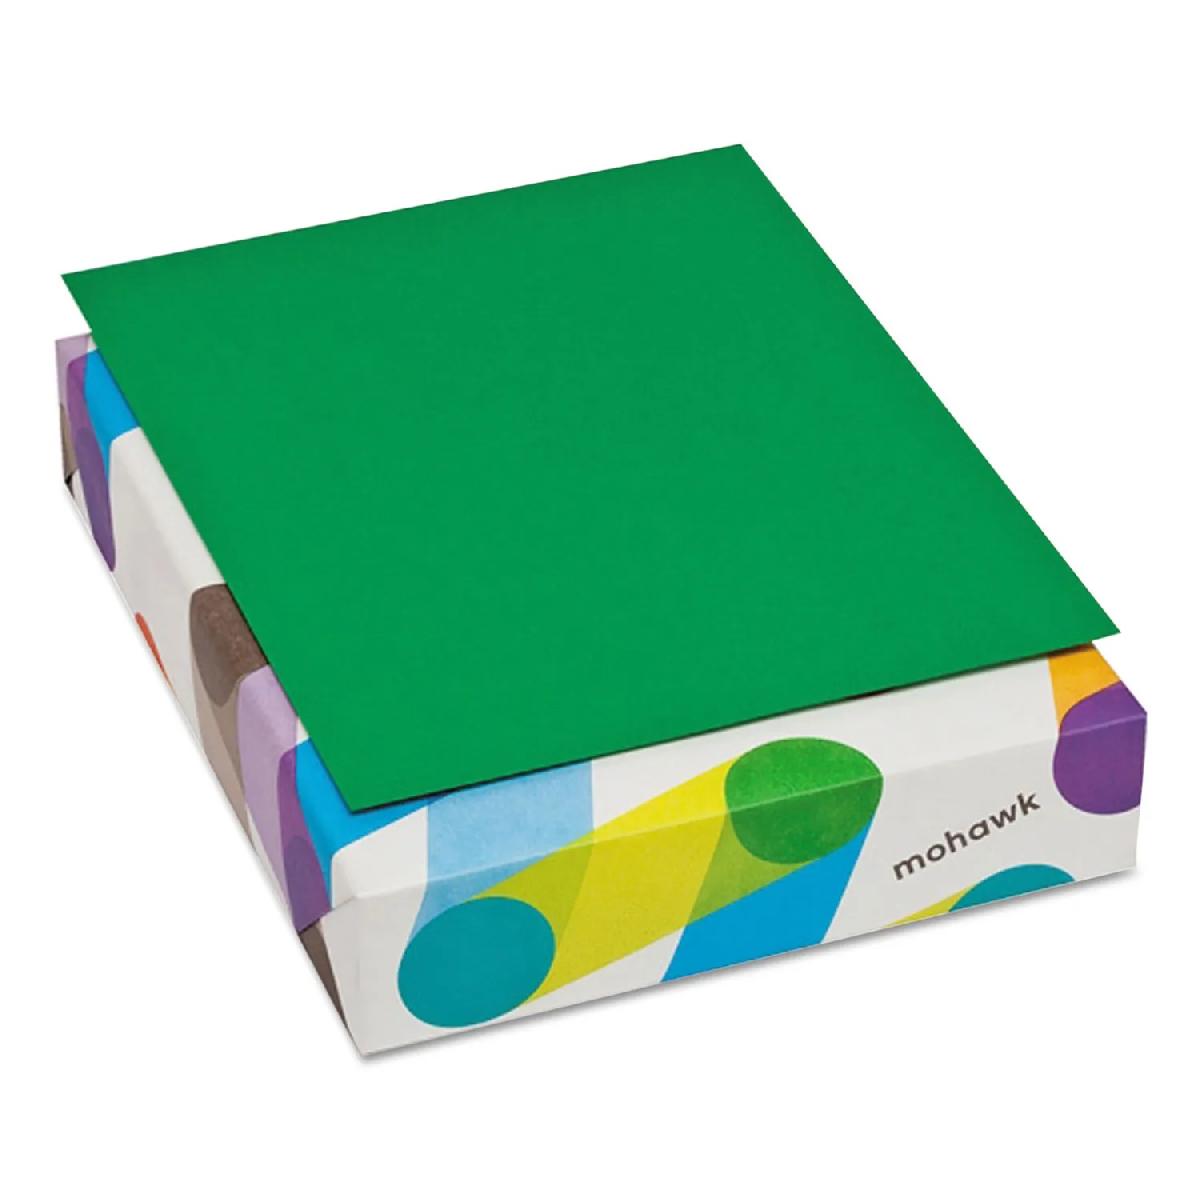 Mohawk Paper® BriteHue Green 20 lb. Smooth Text 8.5x11 in. 500 Sheets per Ream